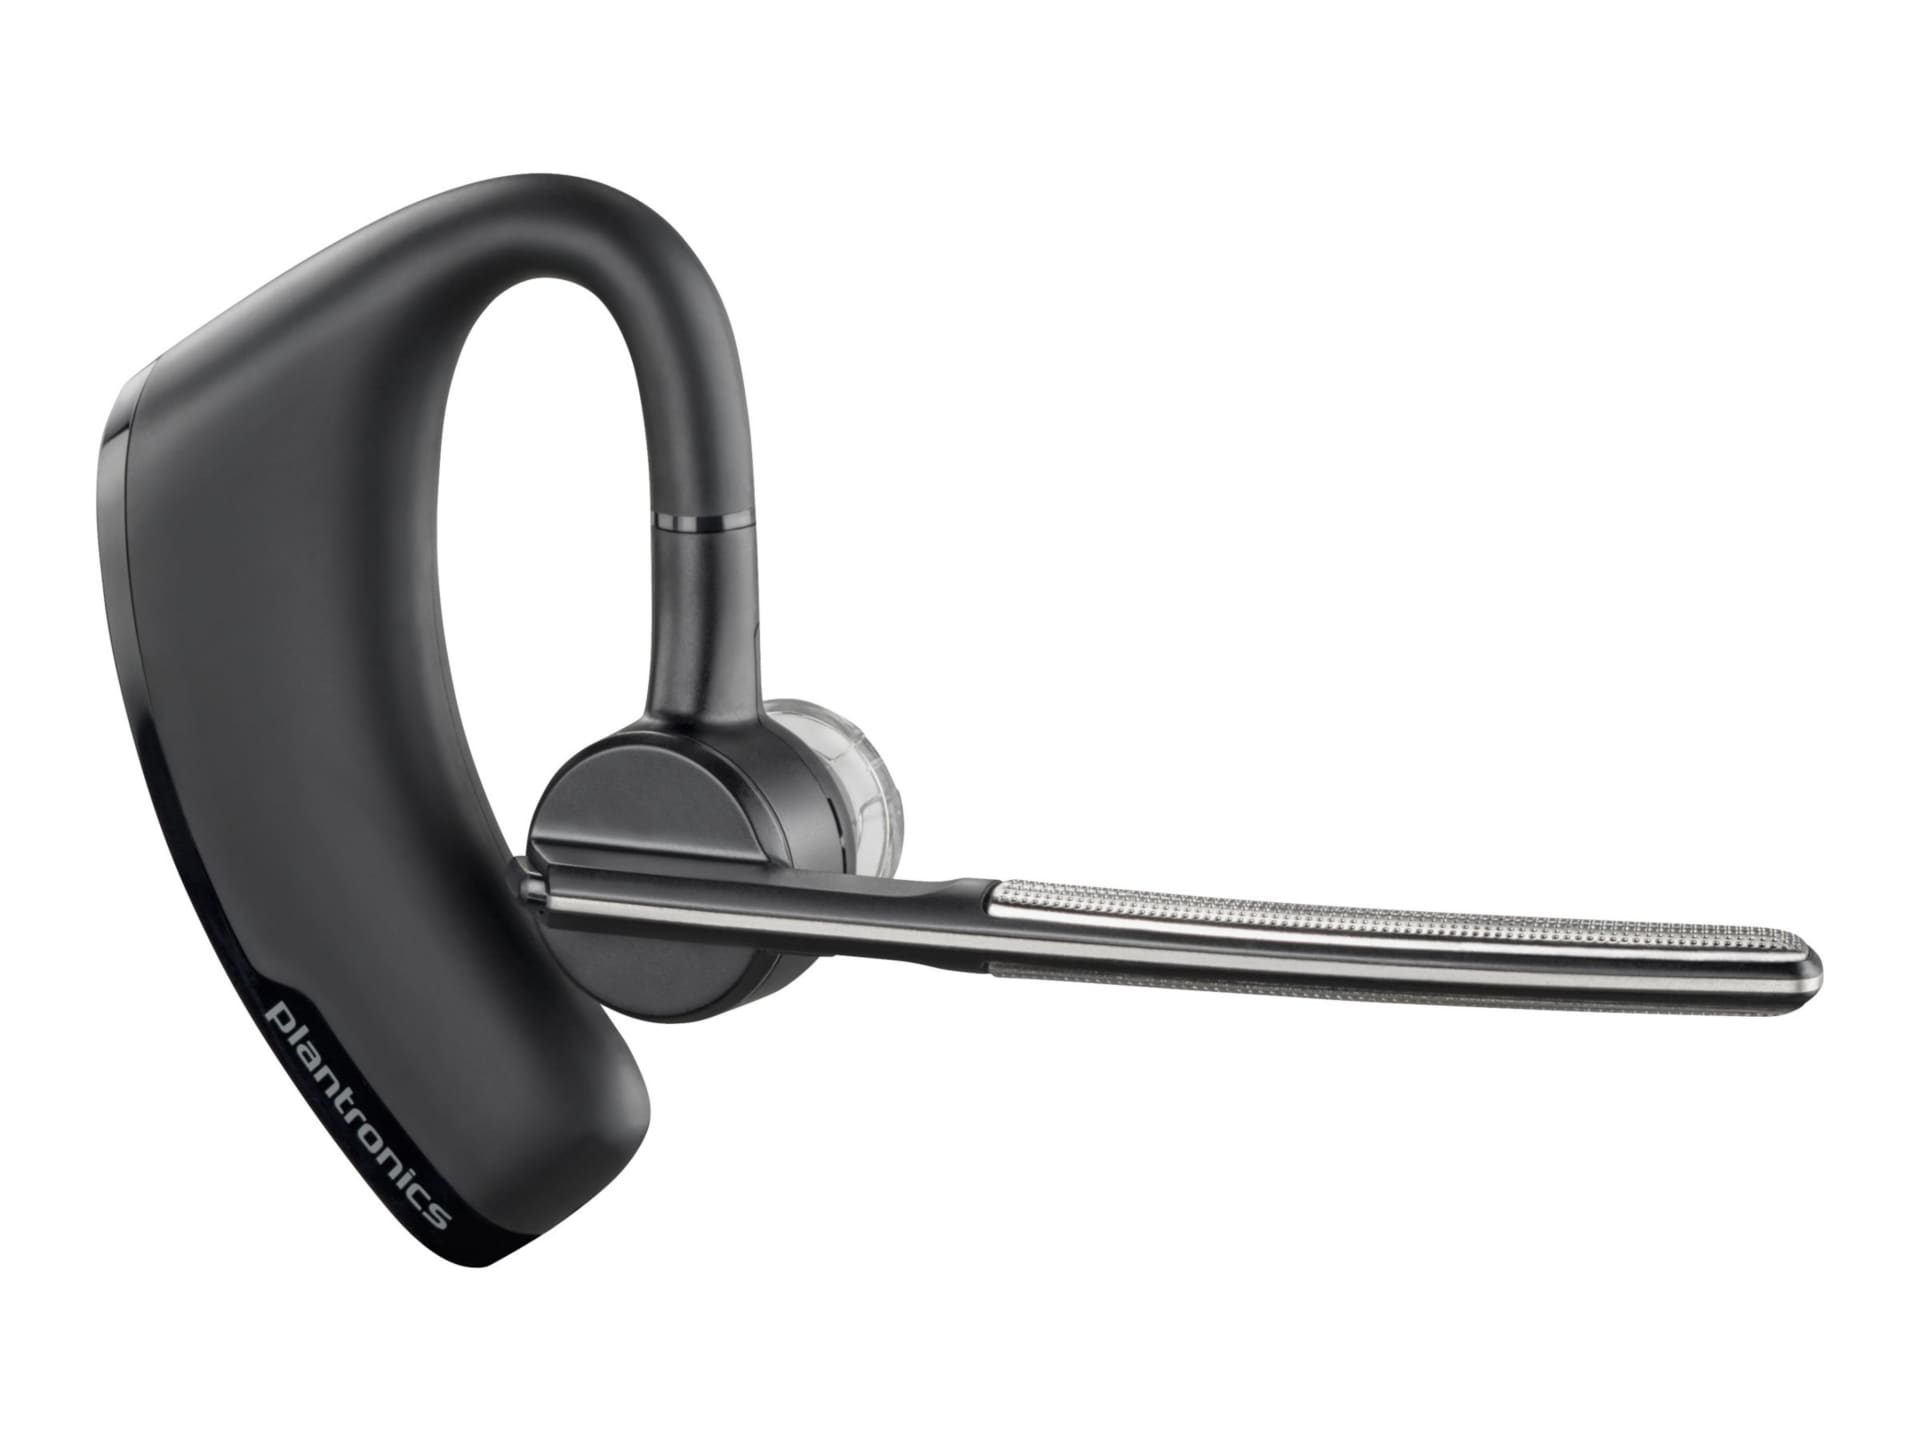 schade Mooi Orthodox Poly Voyager Legend - headset - 87300-342 - Wireless Headsets - CDW.com